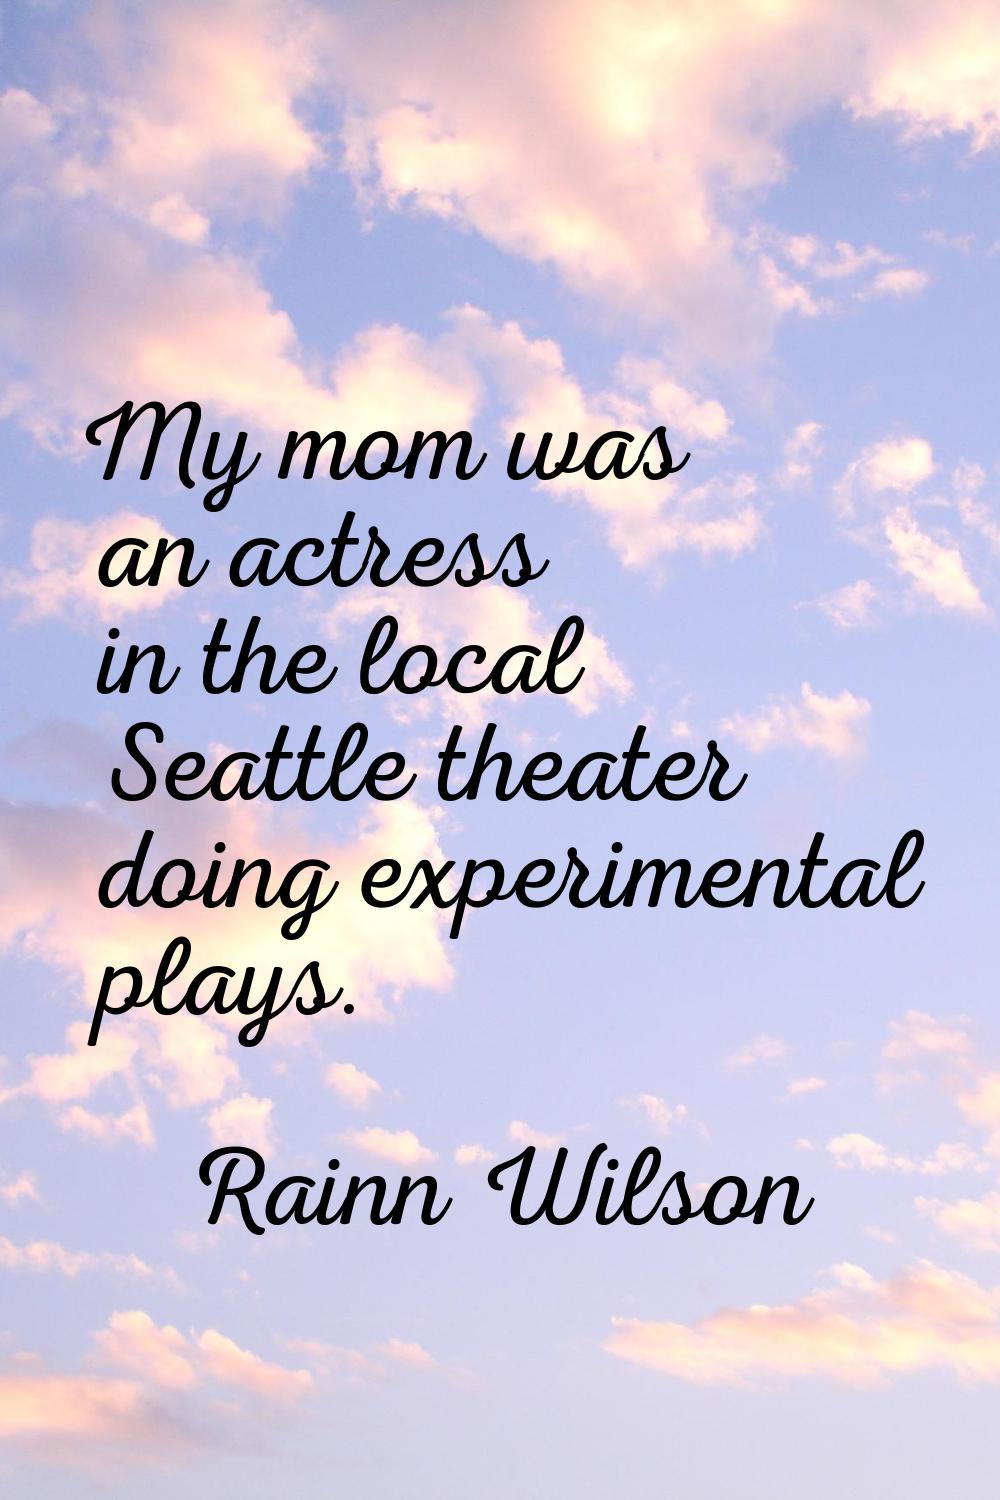 My mom was an actress in the local Seattle theater doing experimental plays.